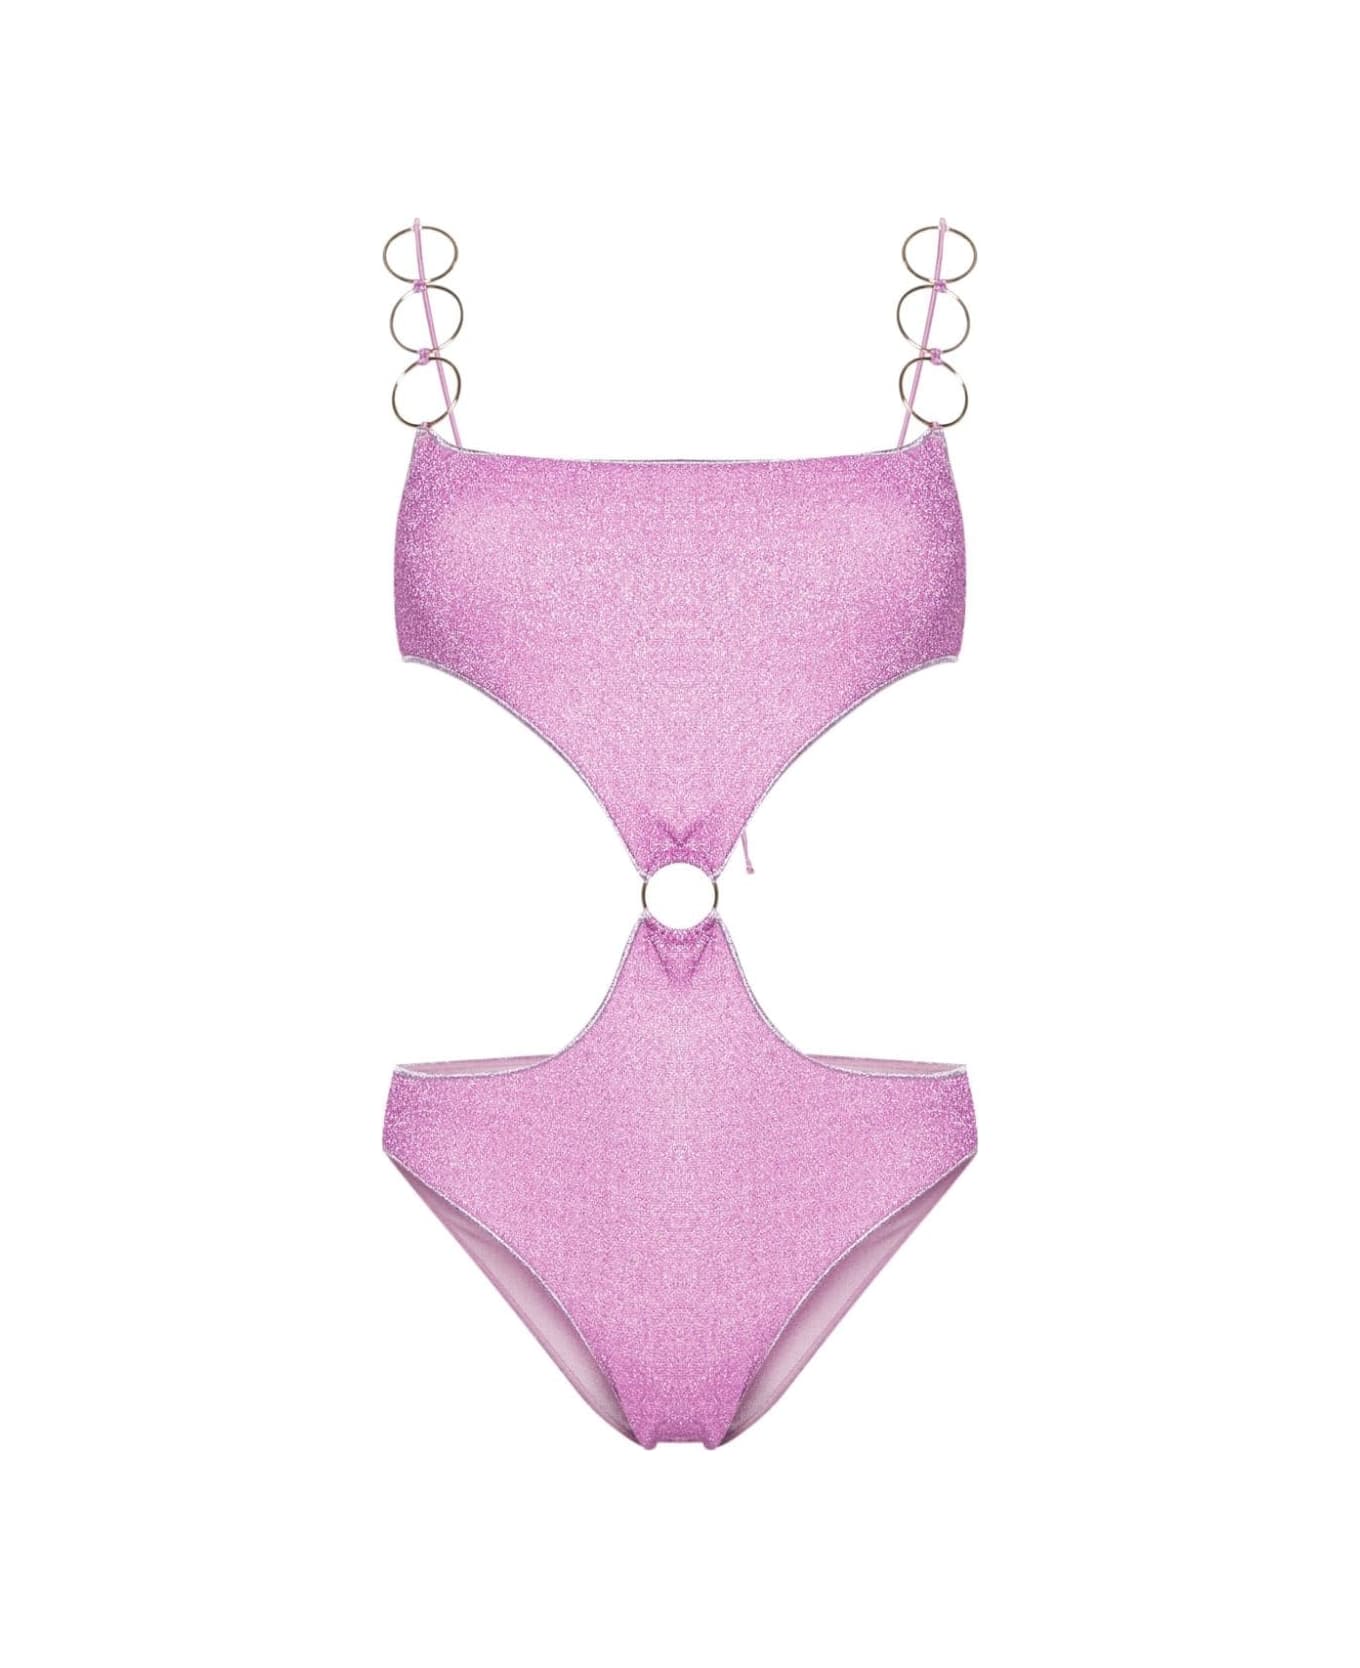 Oseree Wisteria Lumiere Ring Swimsuit - Purple